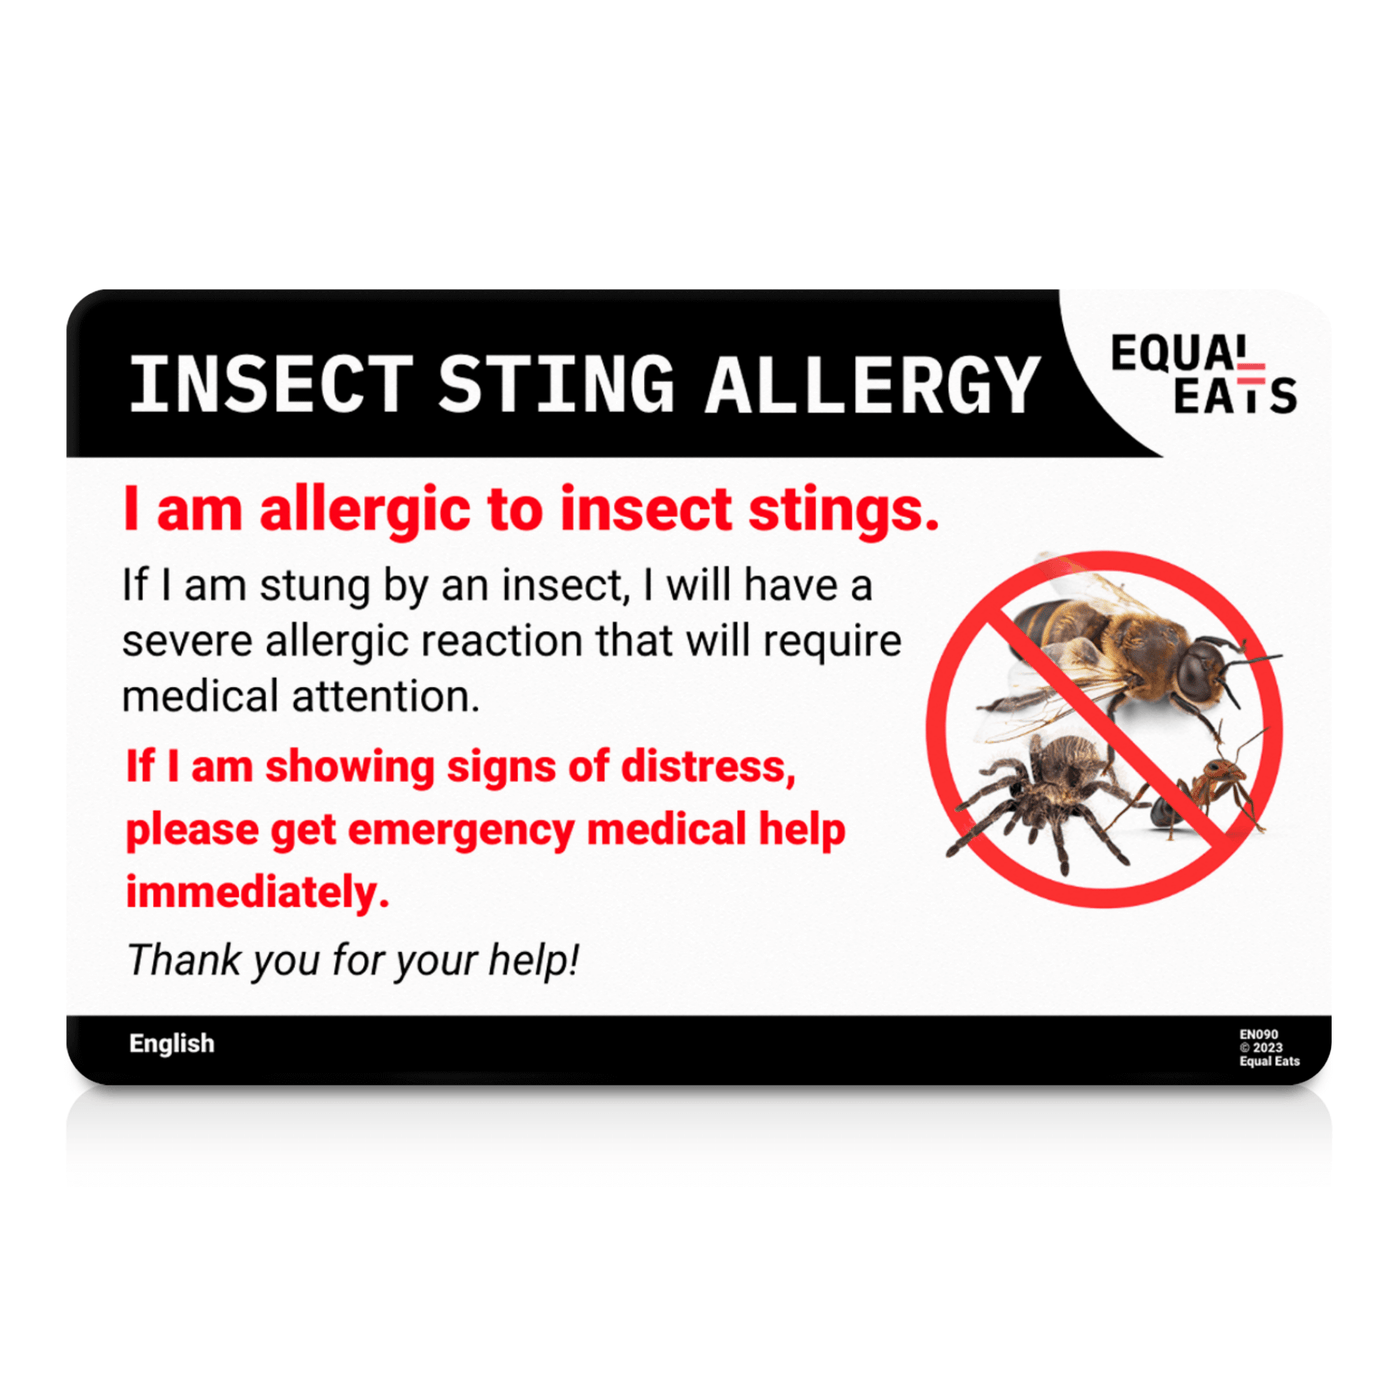 Dutch (Netherlands) Insect Sting Allergy Card